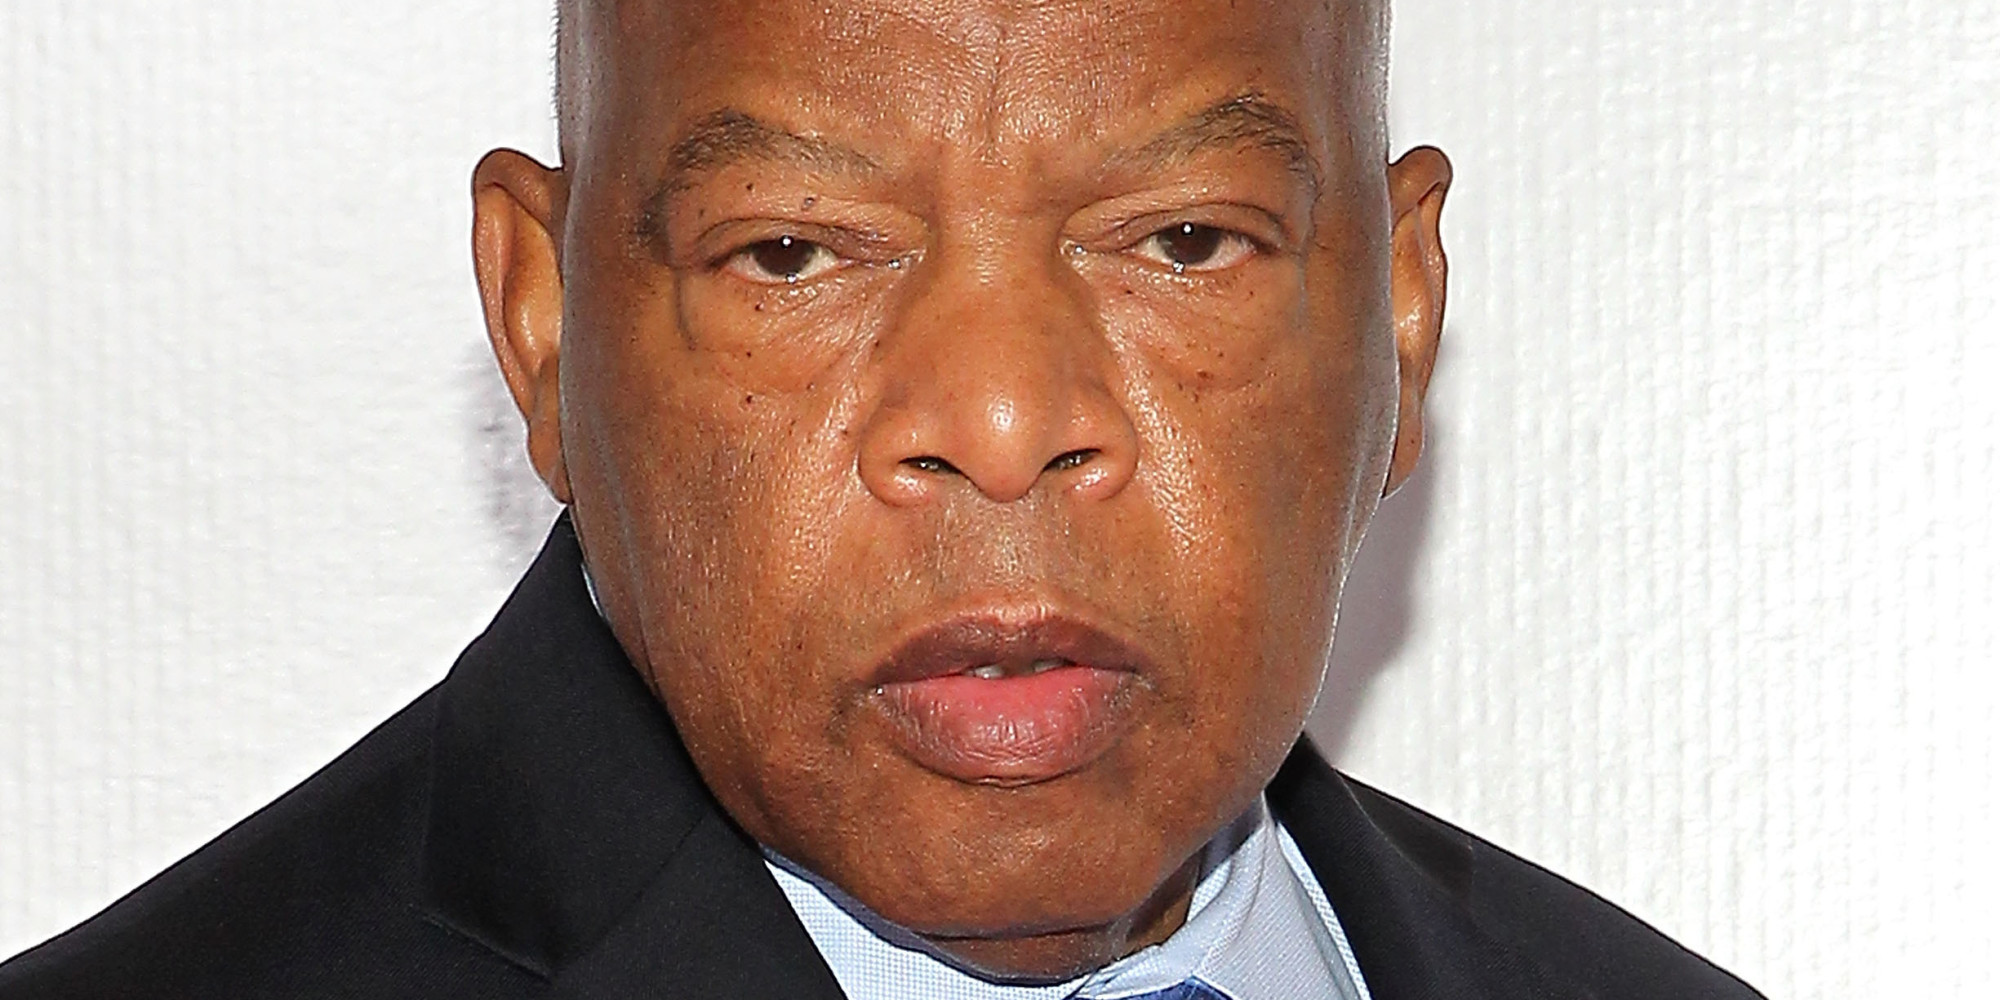 John Lewis: Seeing Myself Being Portrayed In &#39;Selma&#39; Is &#39;Almost Too Much&#39; | HuffPost